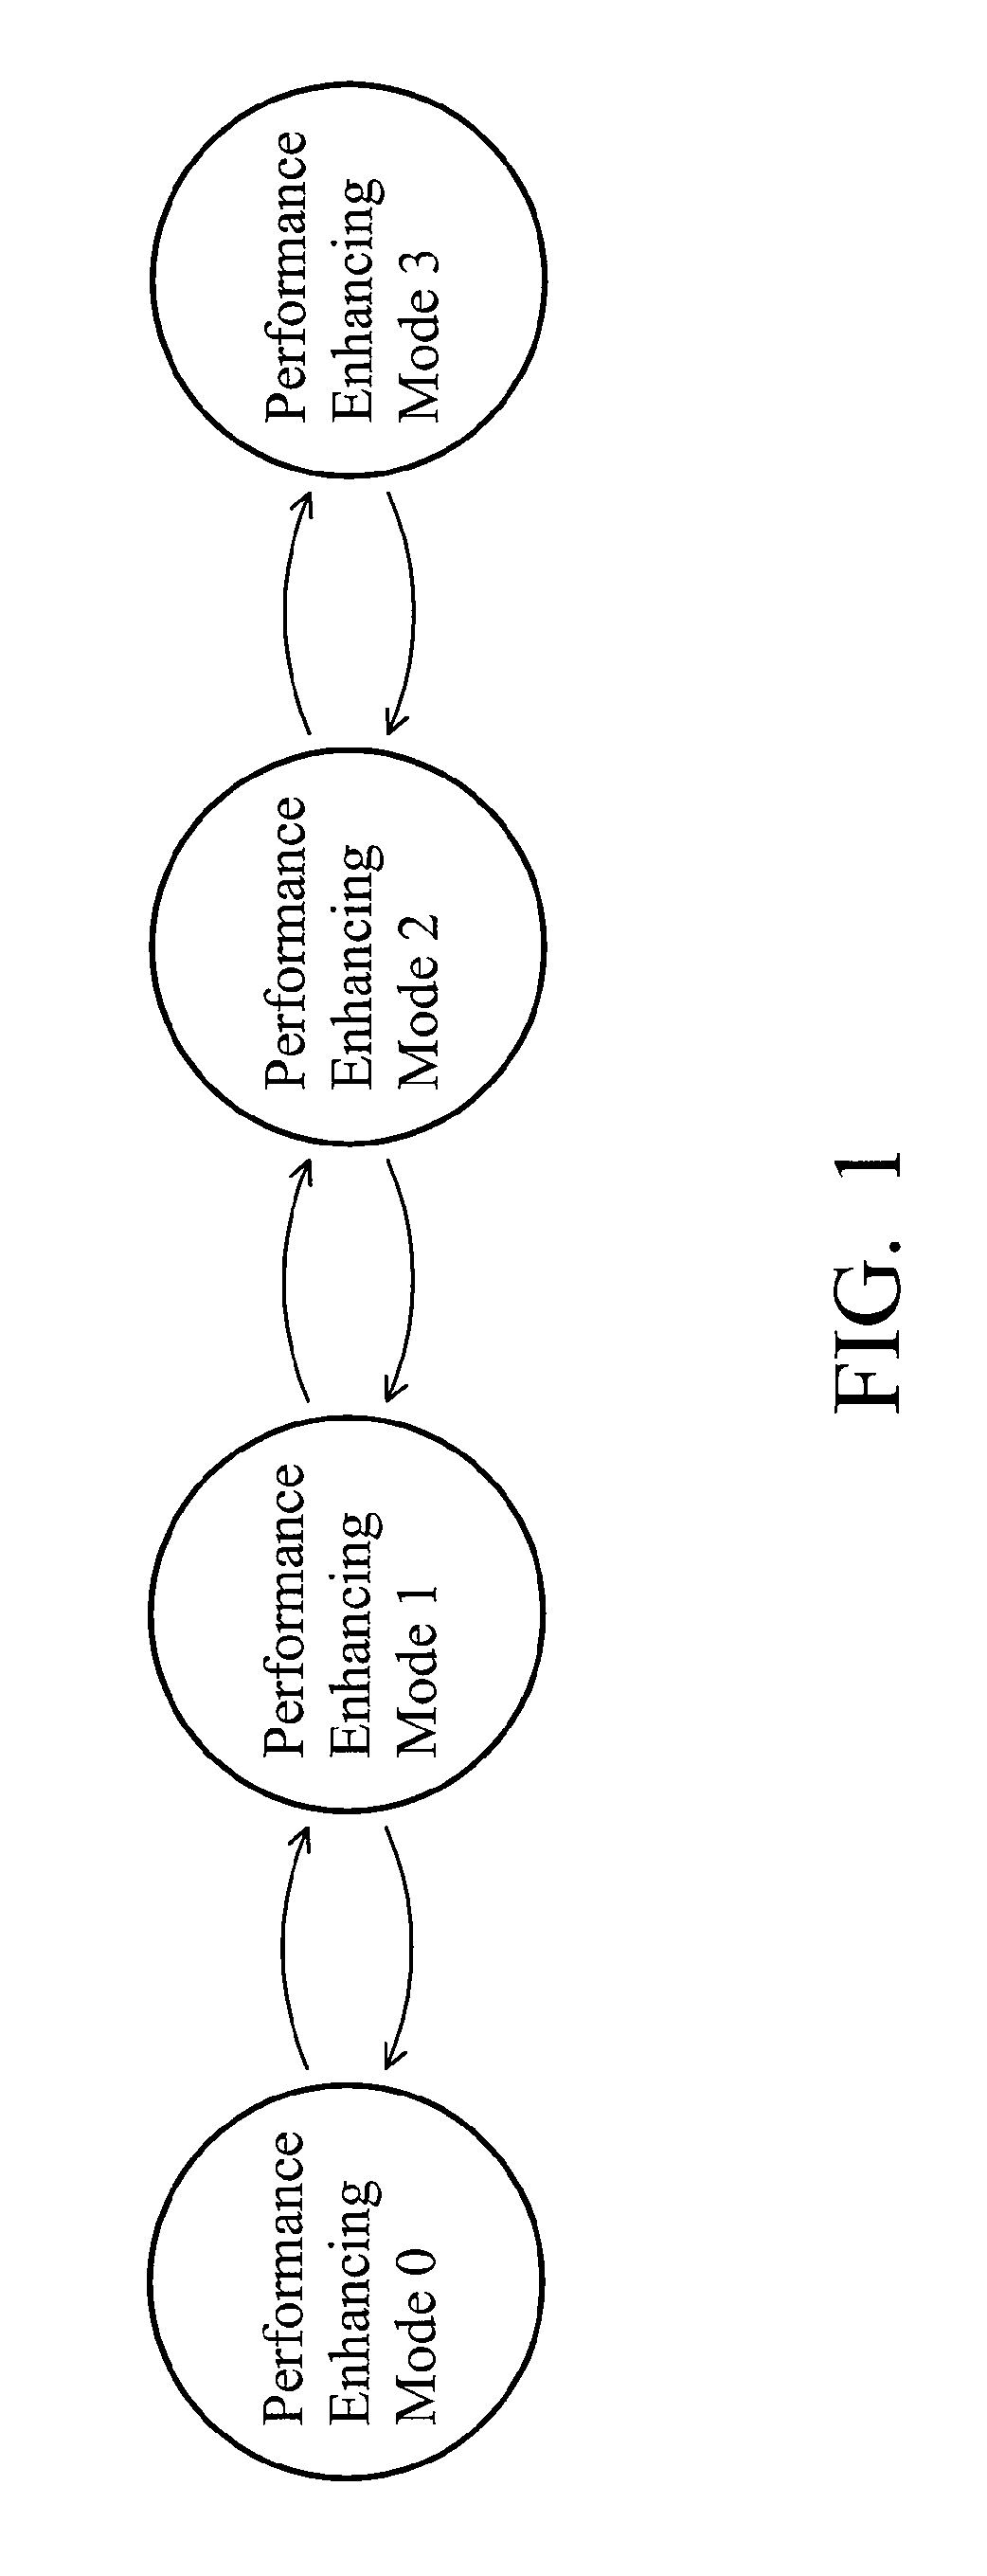 Method for increasing the data processing capability of a computer system